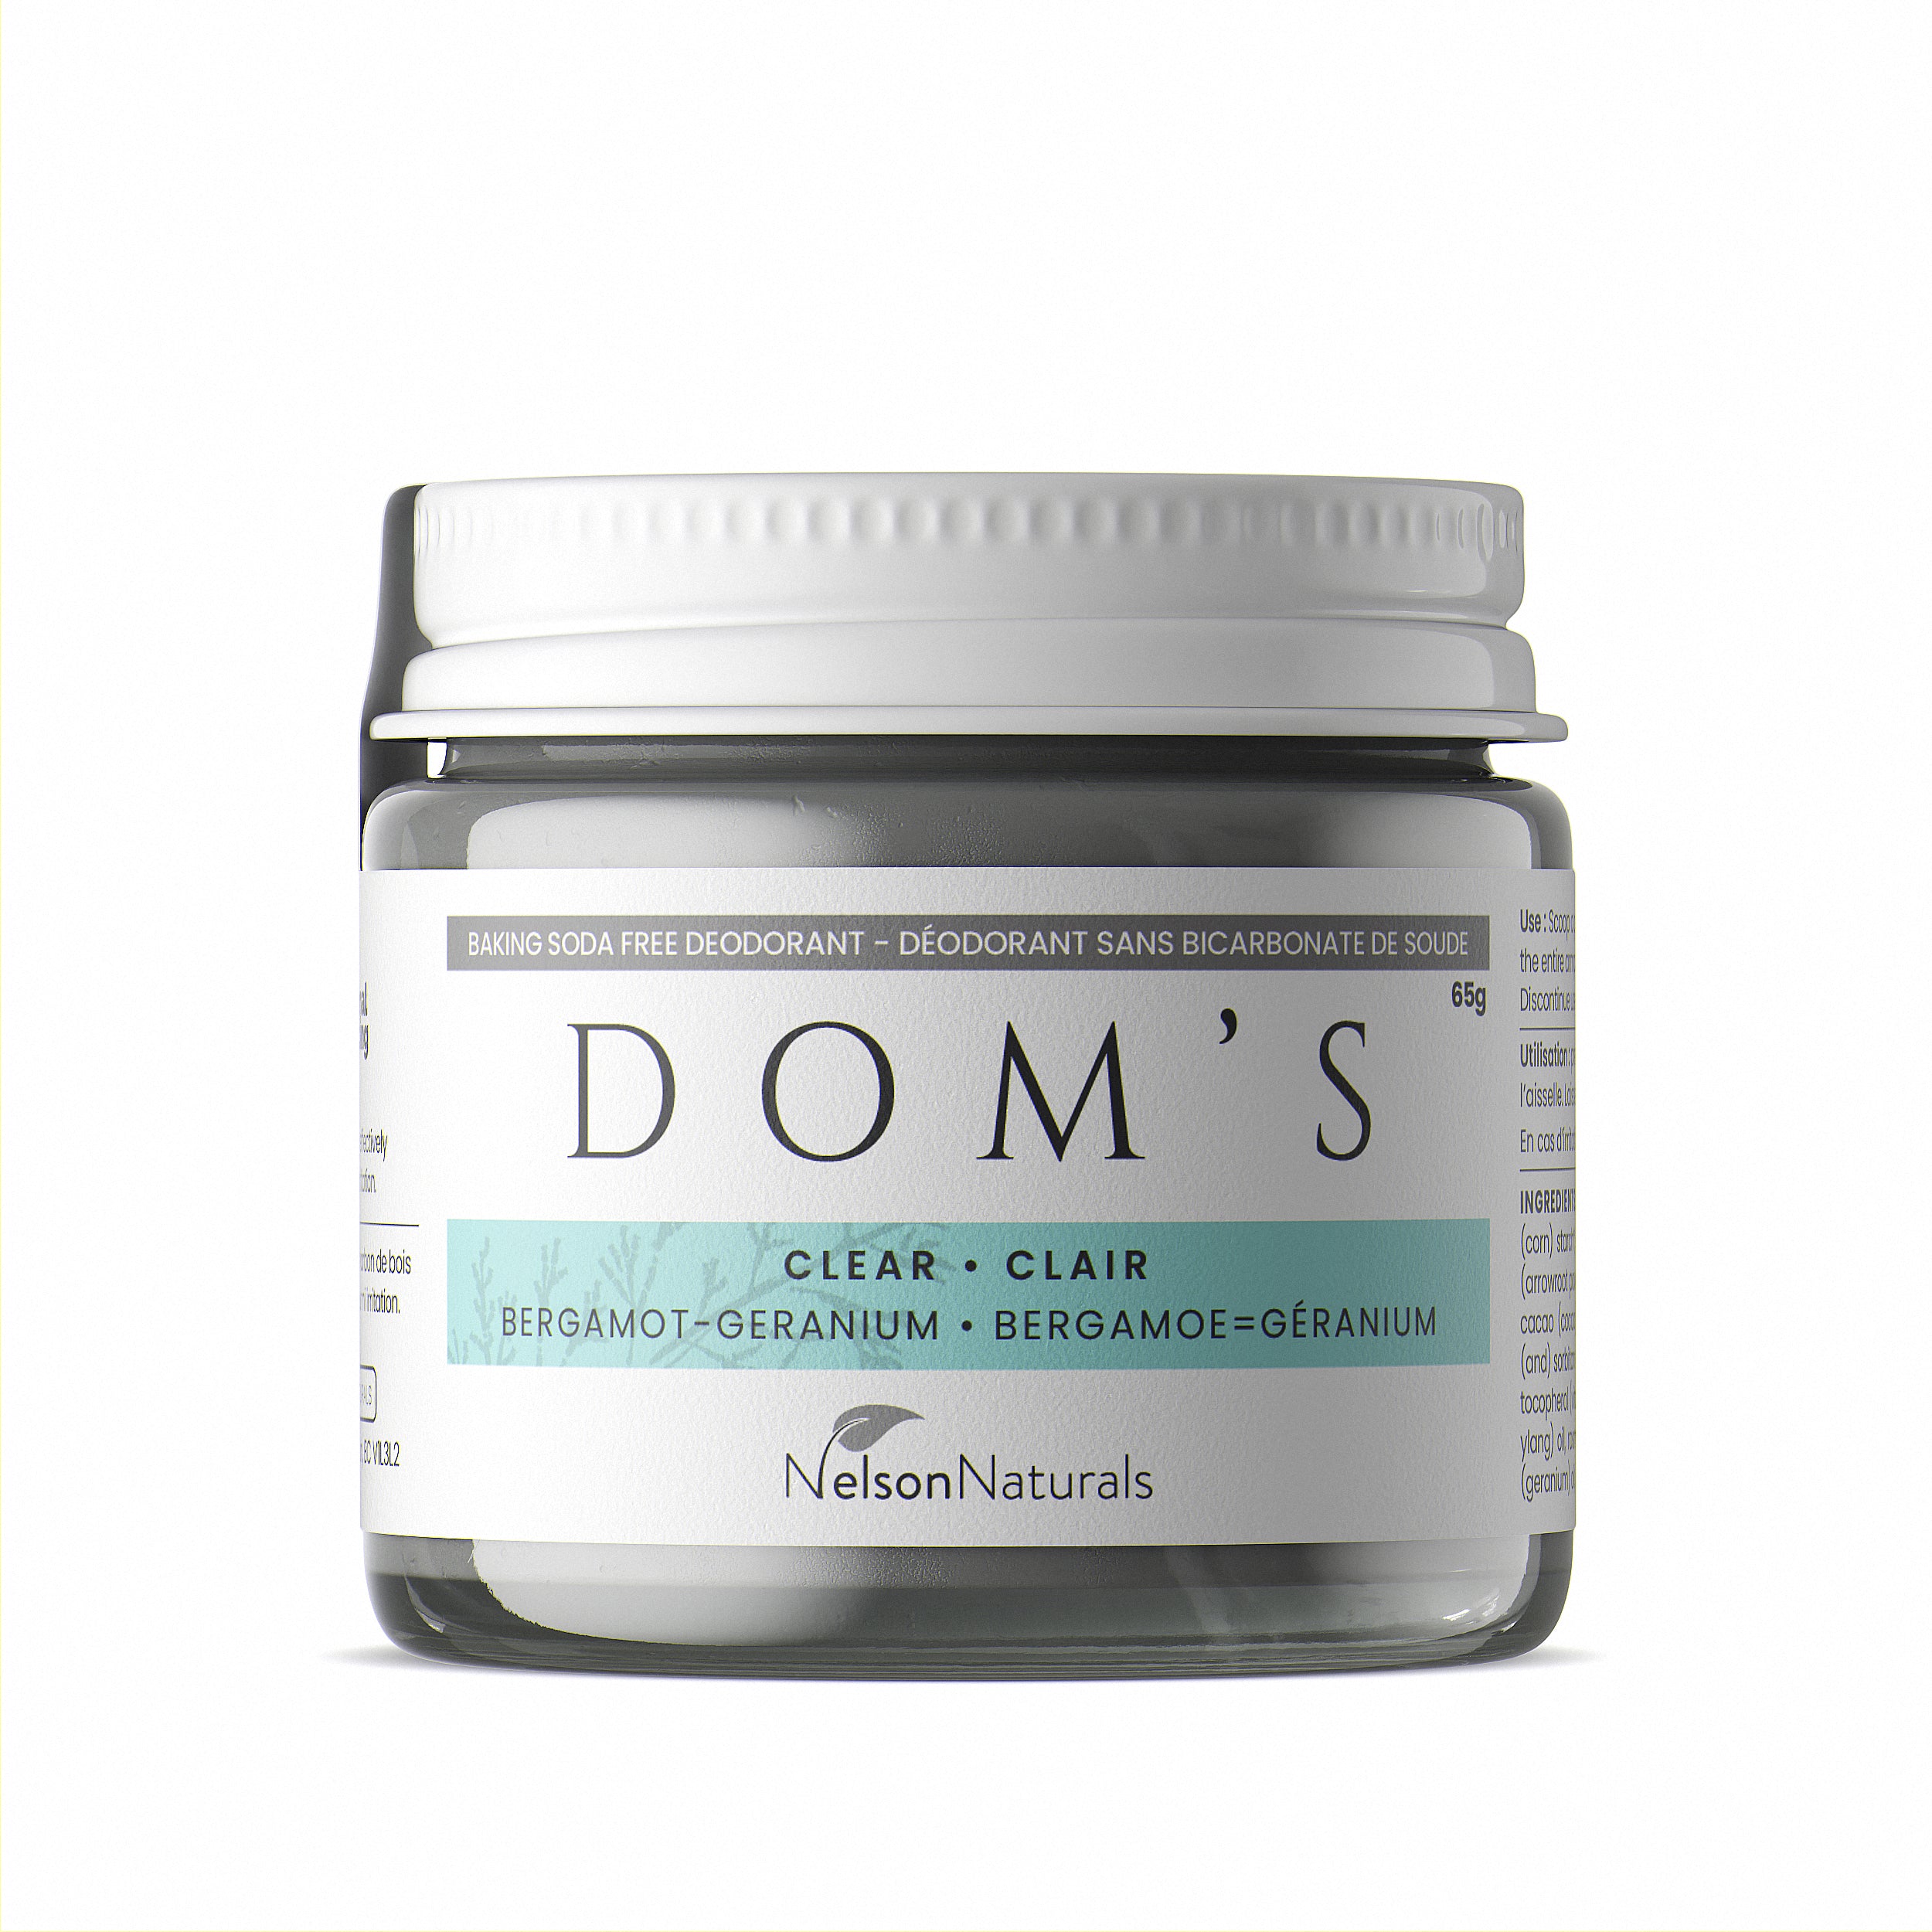 Dom's Deodorant - Clear (baking soda free) 65g Deodorant - nelsonnaturals remineralizing toothpaste